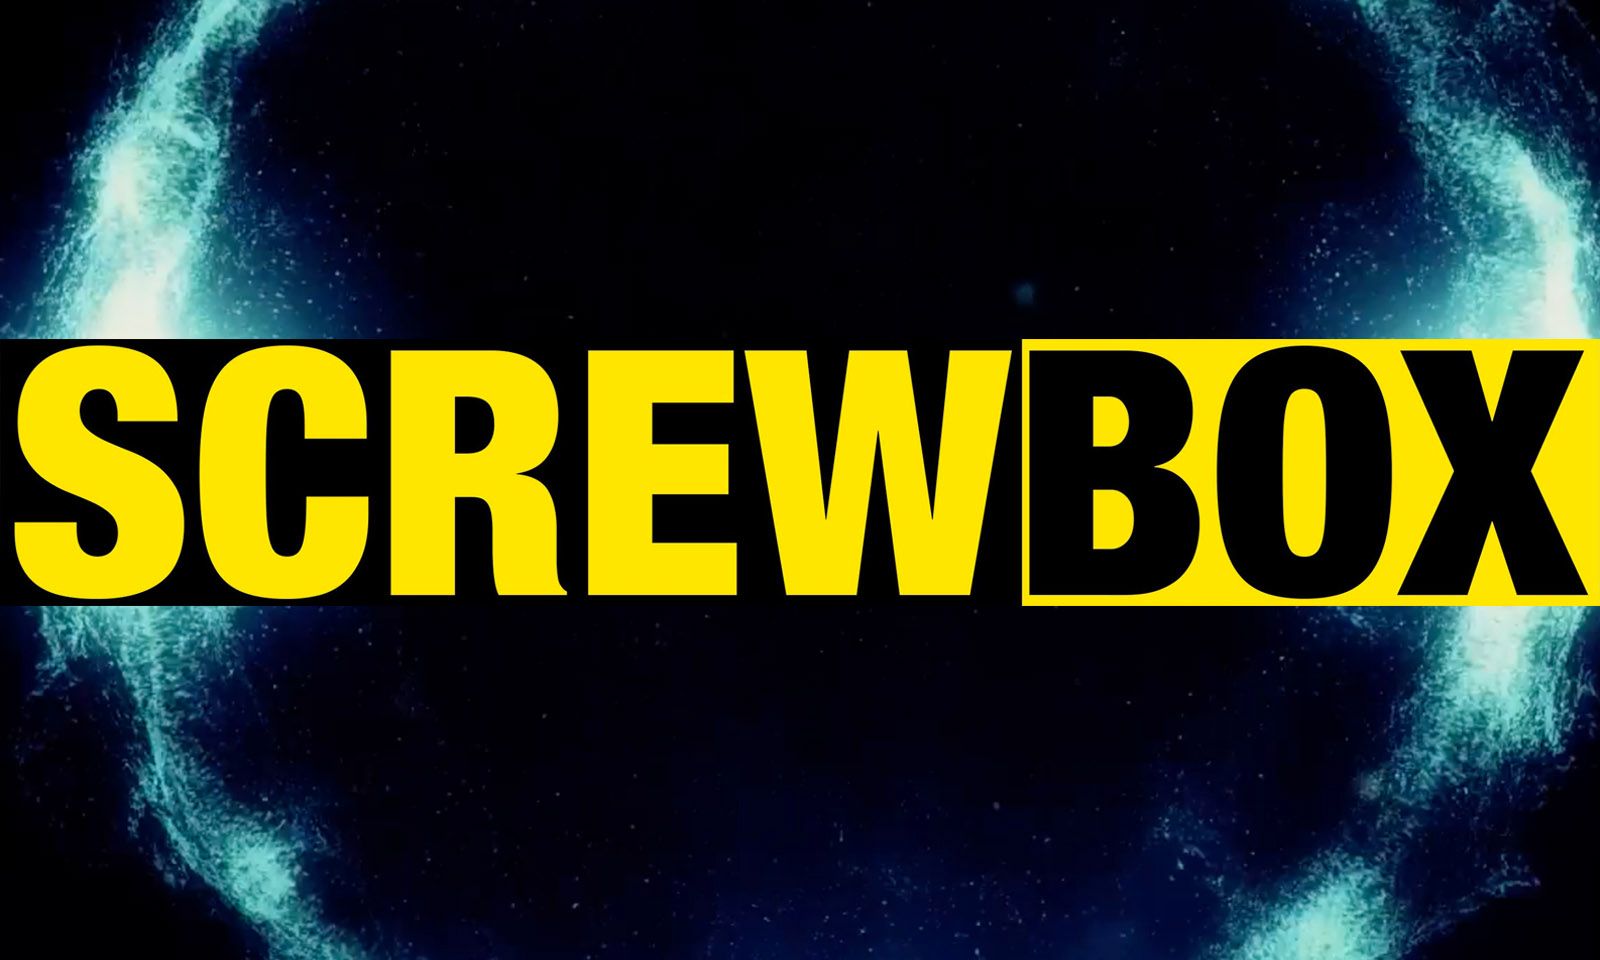 Screwbox.com Introduces New Breed of High-End Adult Content